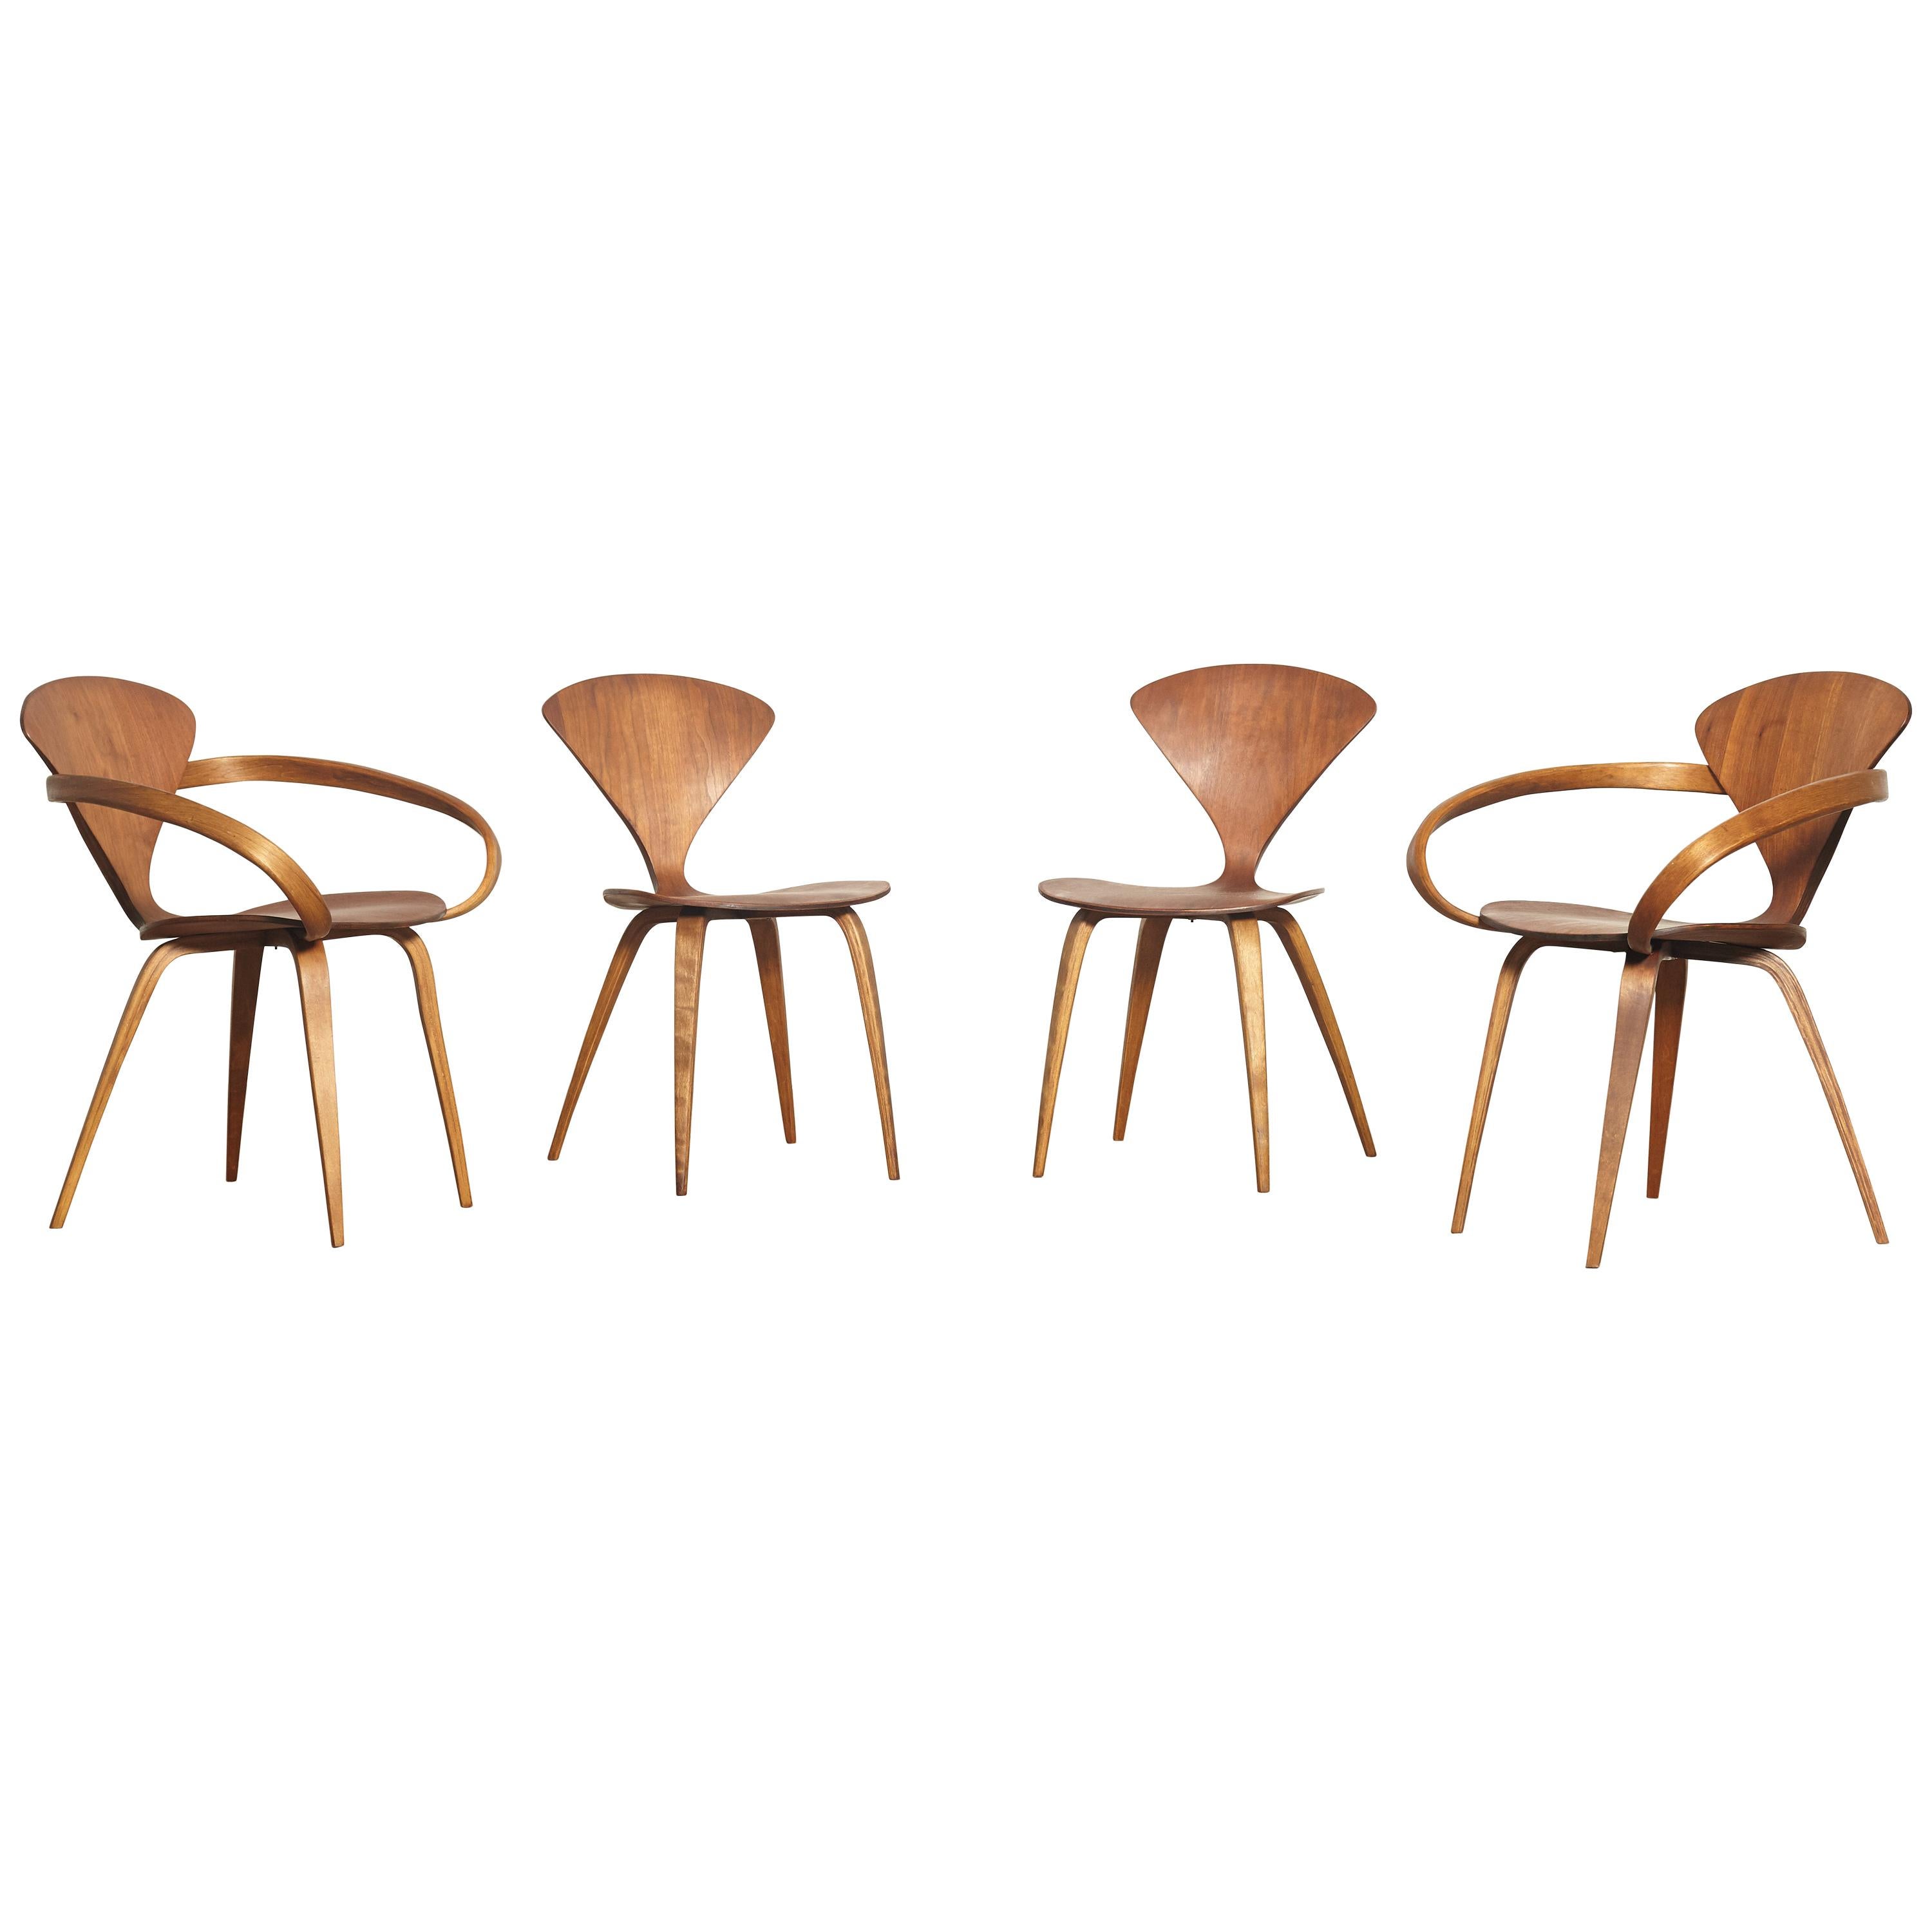 Set of Four Norman Cherner Dining Chairs, Made by Plycraft, USA, 1960s